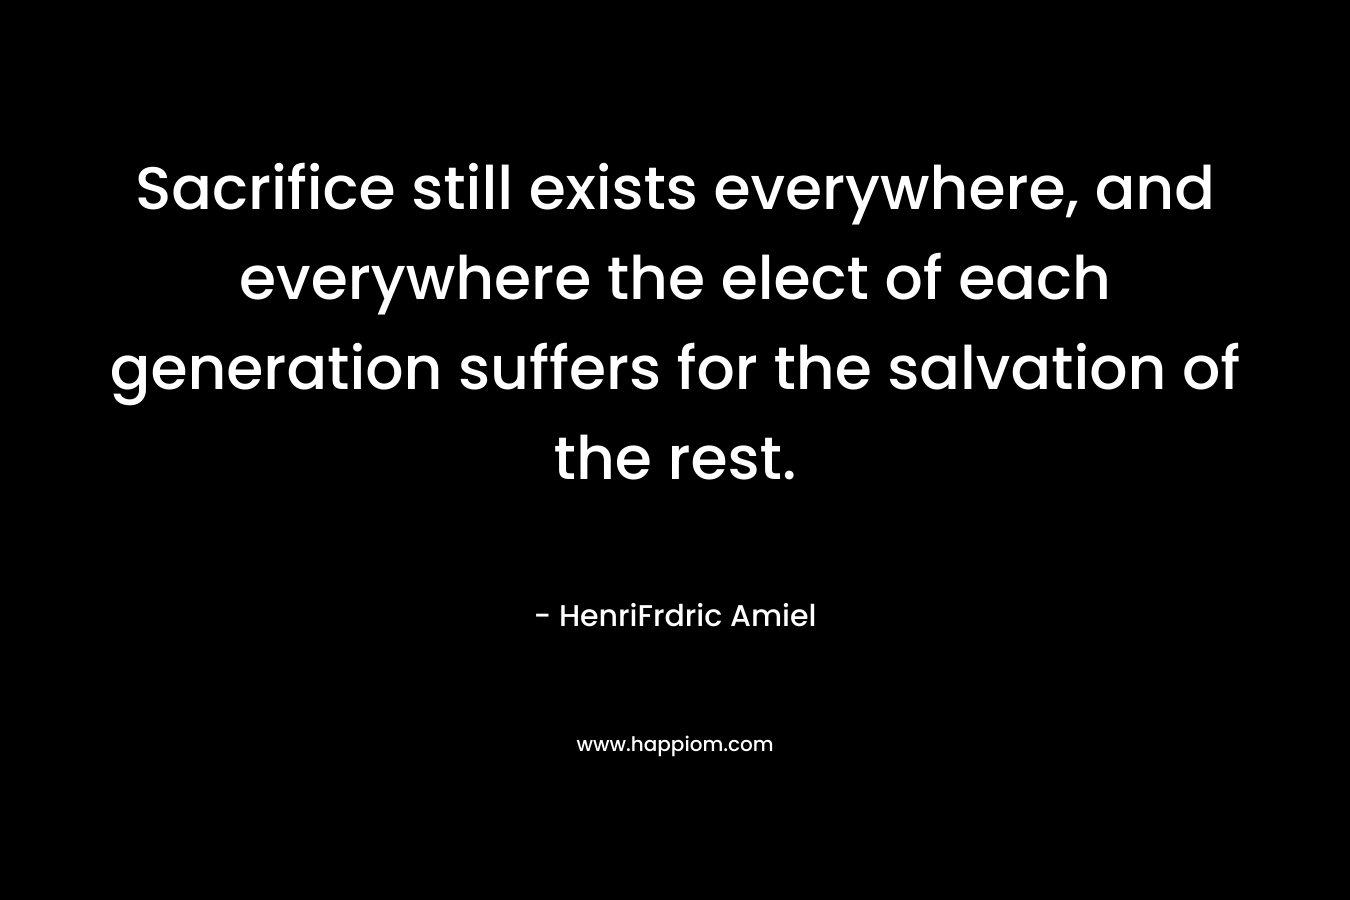 Sacrifice still exists everywhere, and everywhere the elect of each generation suffers for the salvation of the rest. – HenriFrdric Amiel